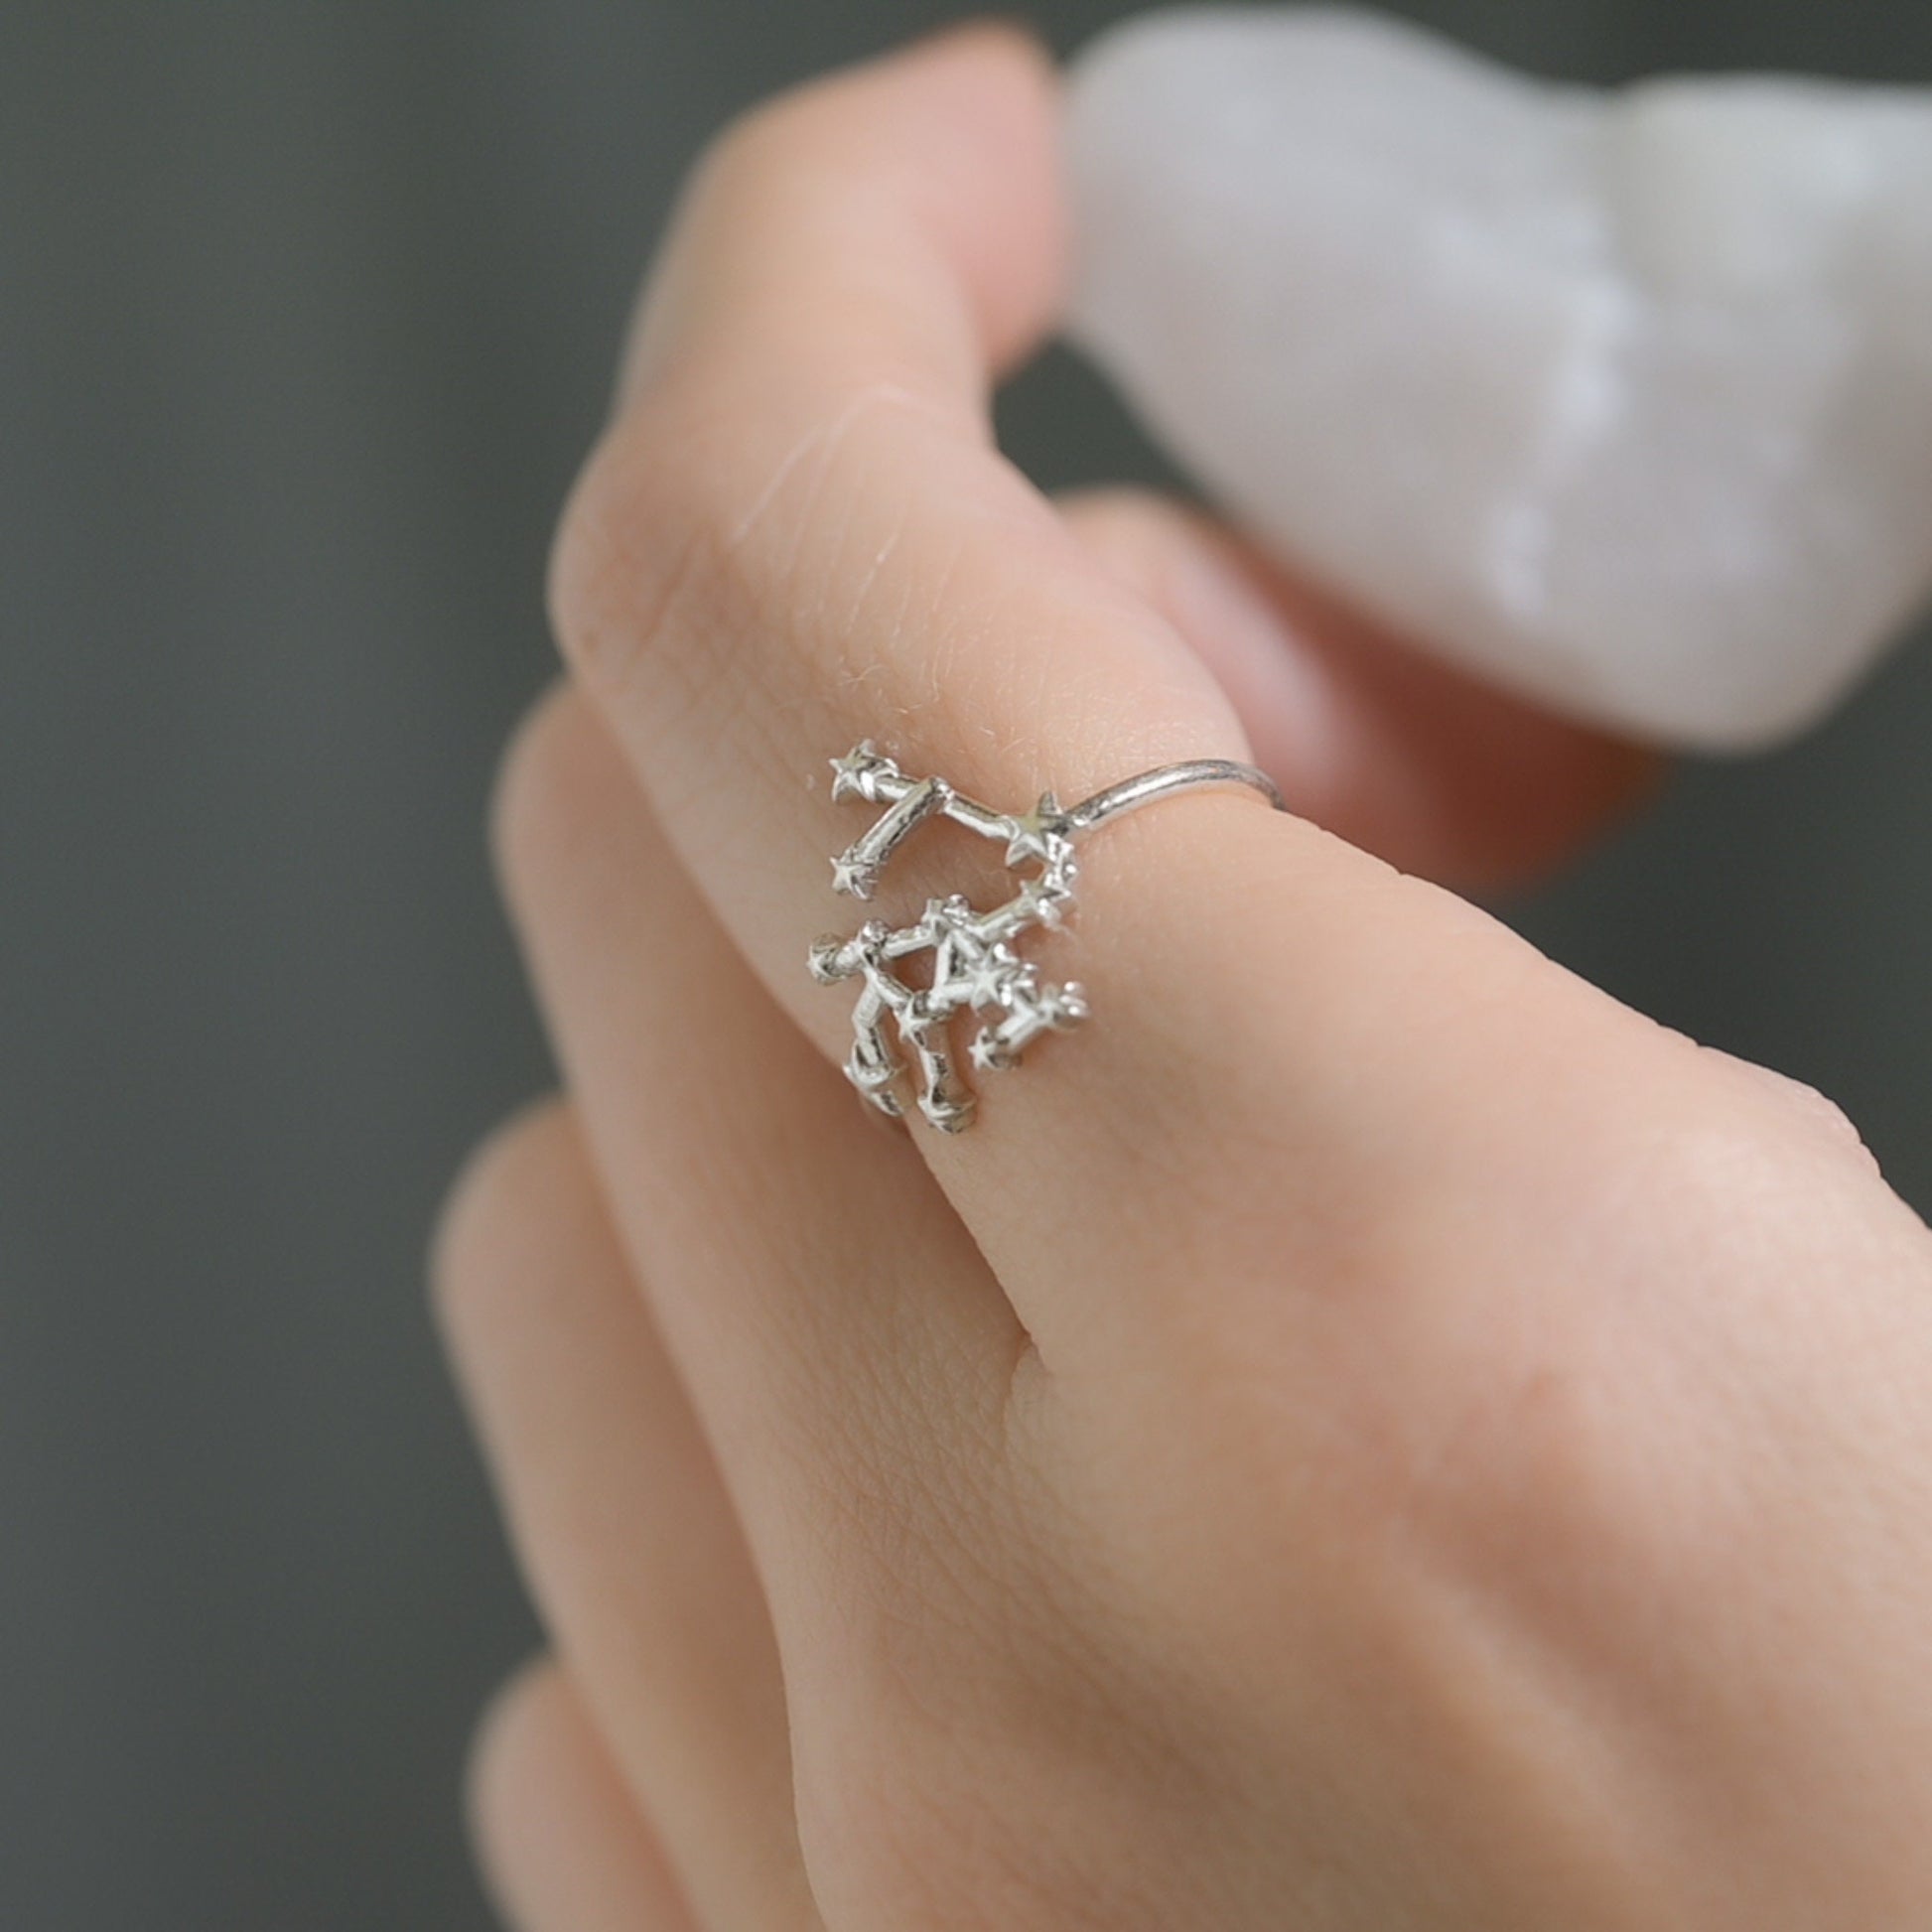 Solid Gold Sagittarius Star Sign Dainty Celestial Zodiac Ring in solid 14K Yellow Gold, 14k White Gold, 14K Rose Gold